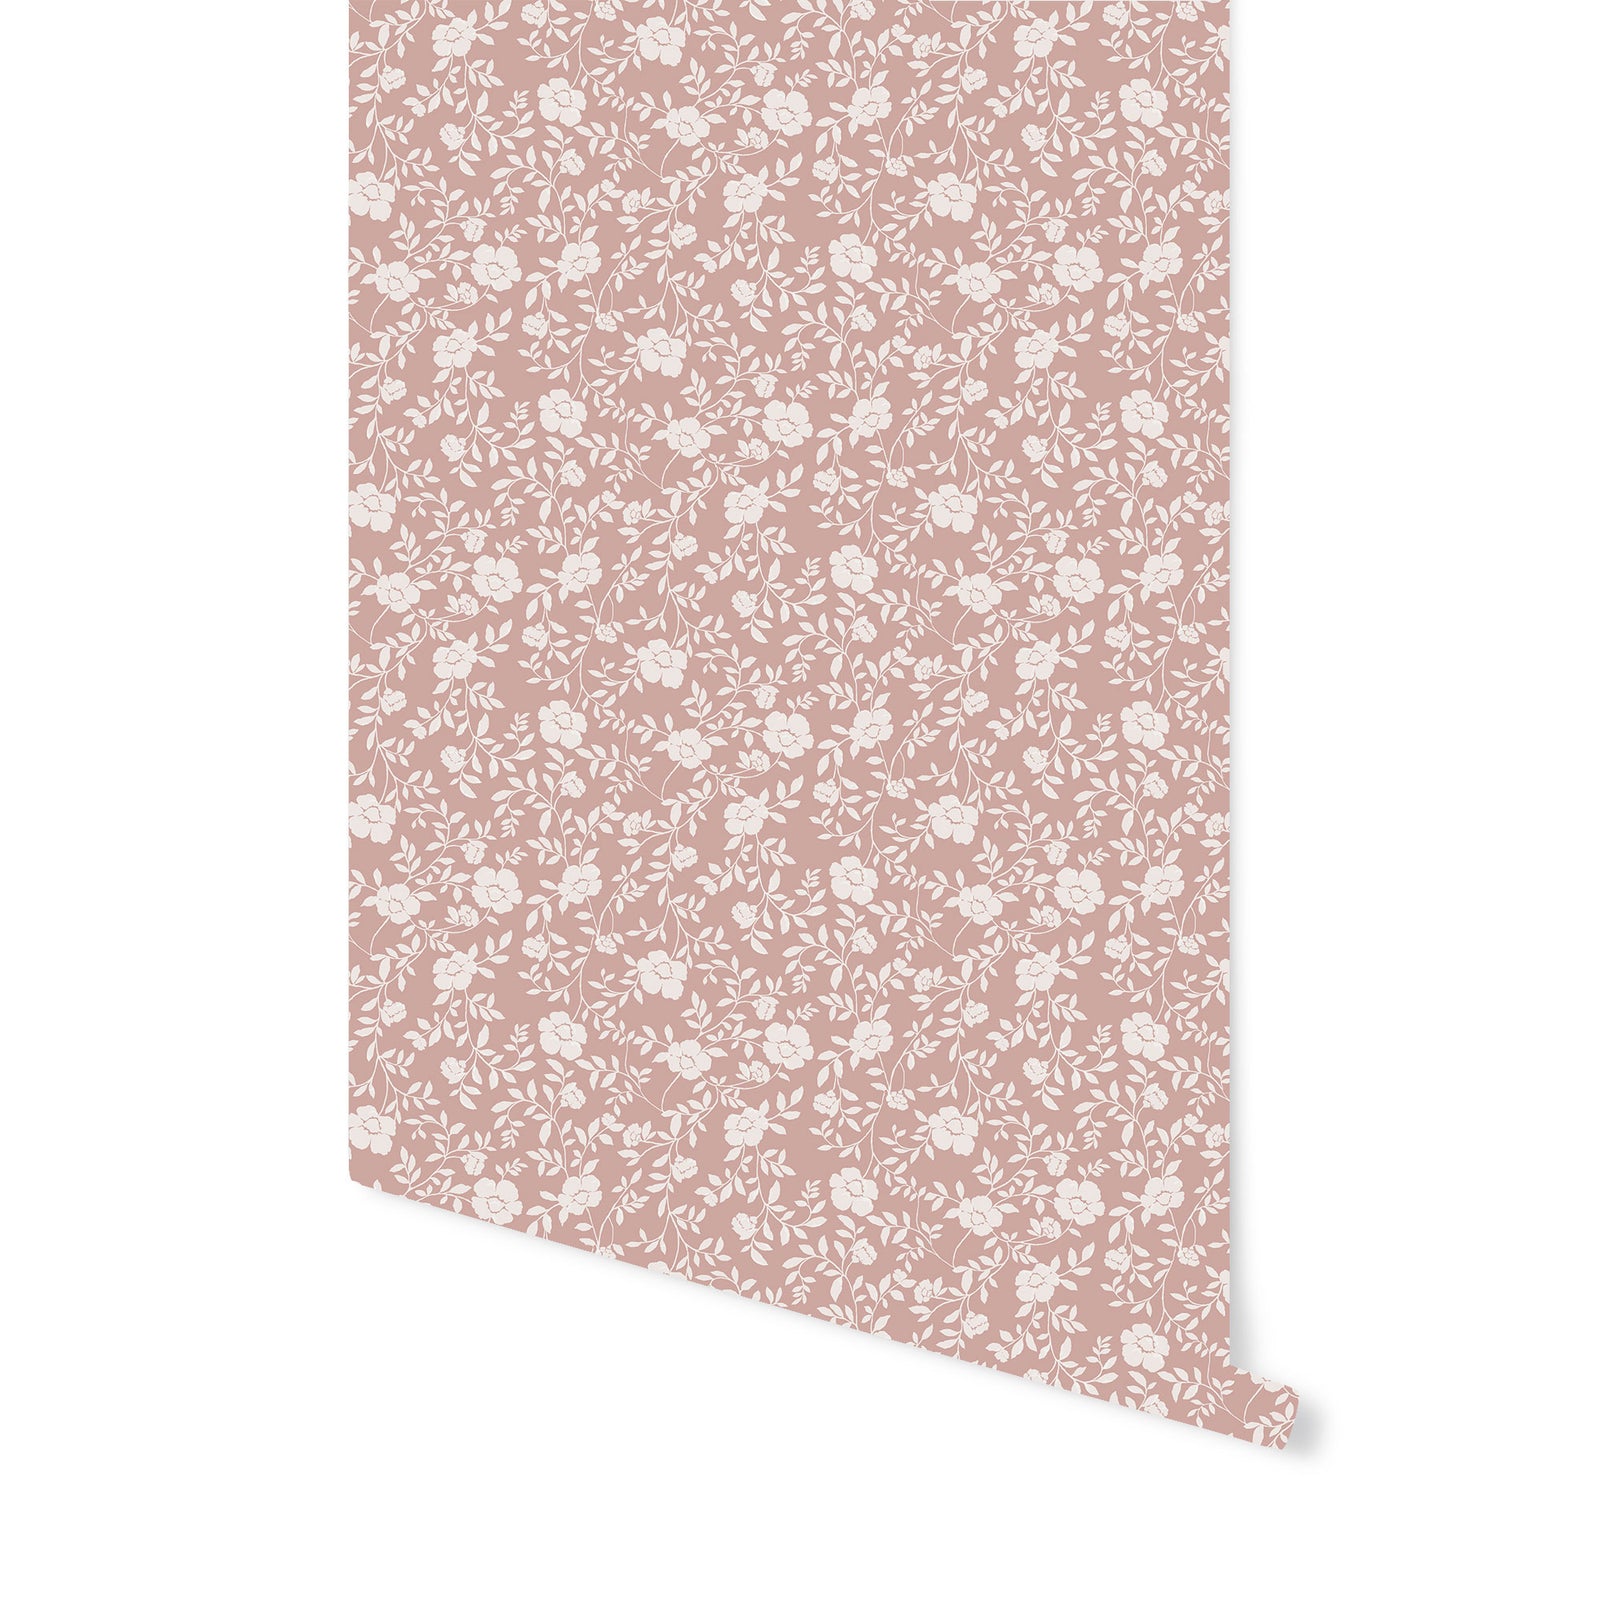 Natasha Floral Wallpaper in Dusty Pink